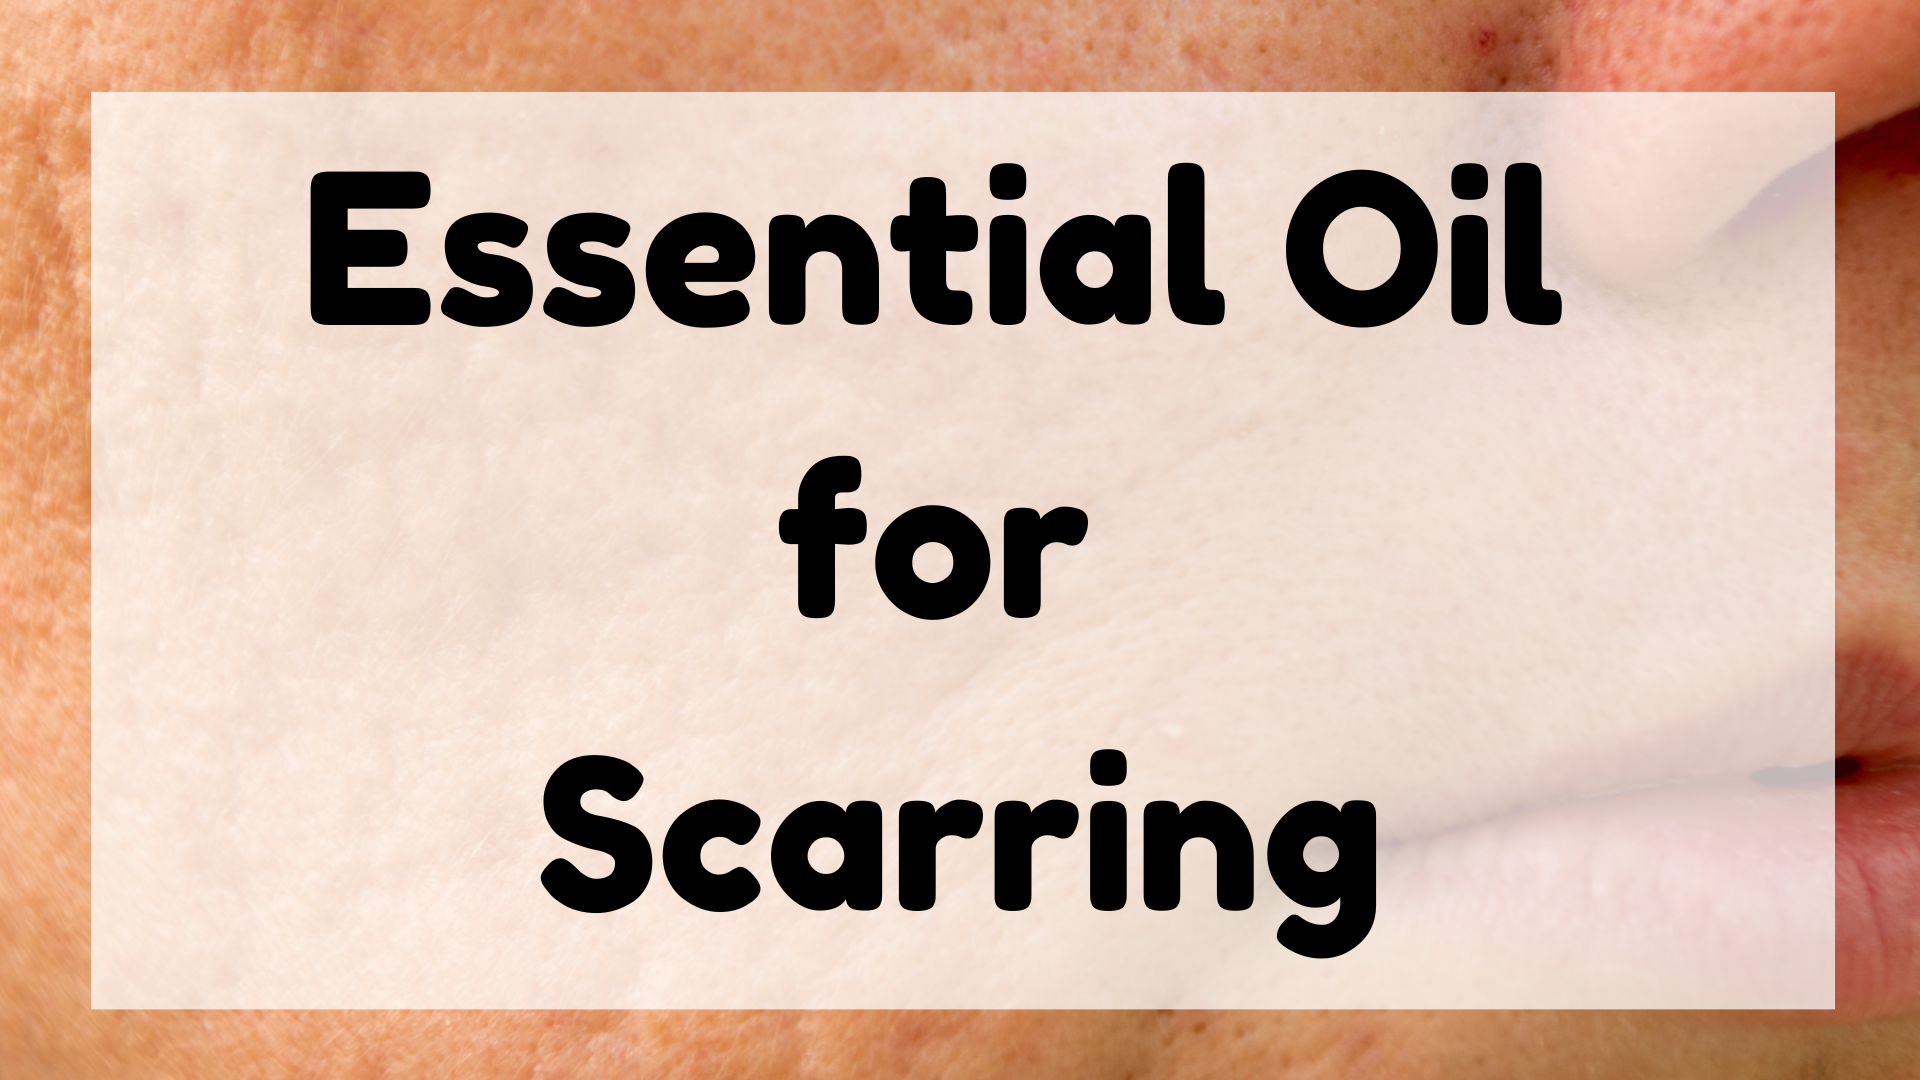 Essential Oil for Scarring featured image